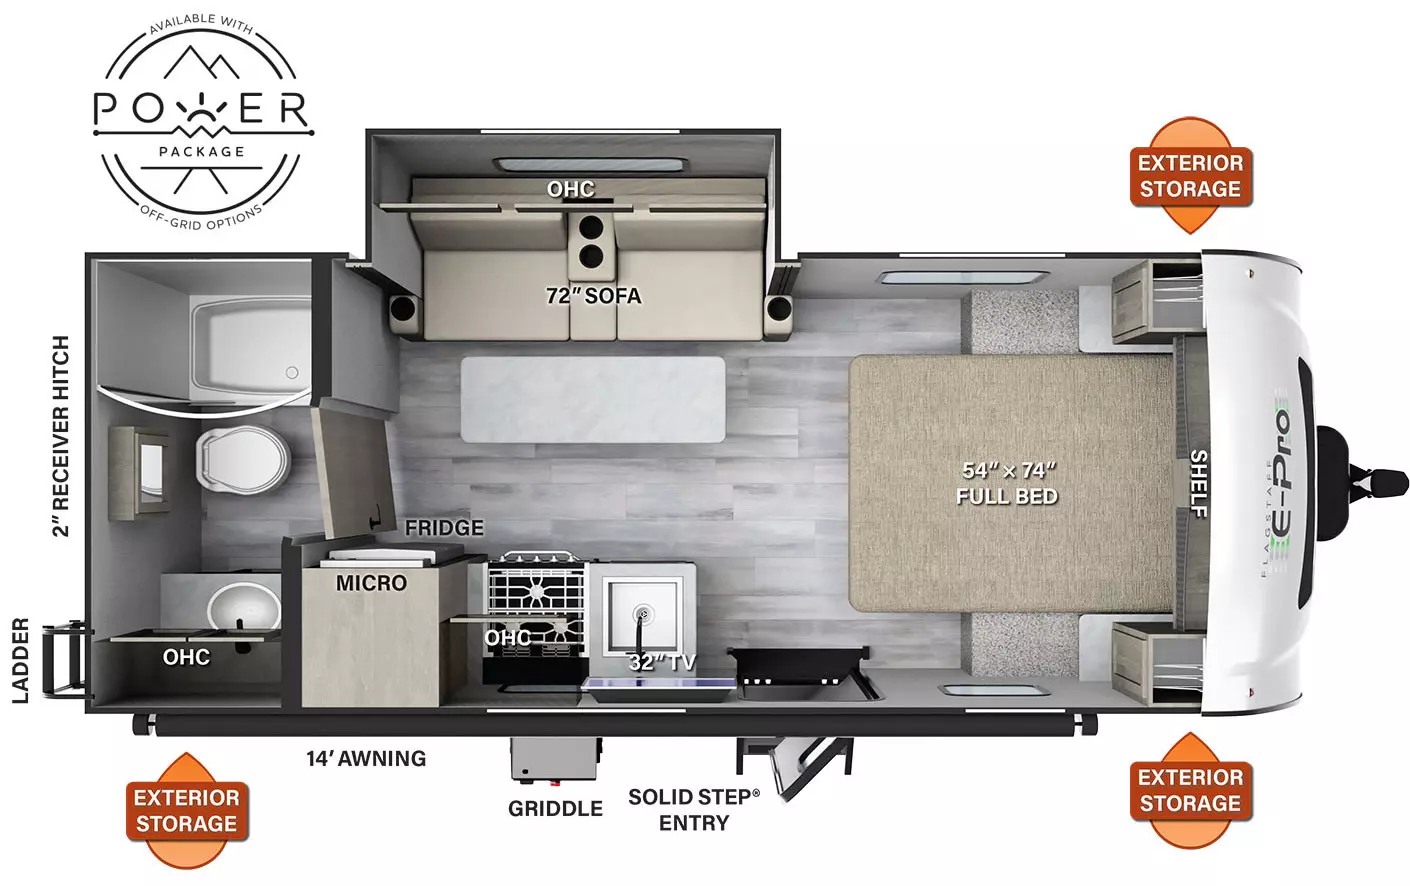 The E20FBS has 1 slide out and 1 entry door. Exterior features include exterior storage, a rear ladder, and a 14 foot awning. Interior layout from front to back: front bedroom with foot facing 54x74 full bed; off-door side slide out containing sofa; door side kitchen countertop with refrigerator, microwave, cooktop stove, overhead cabinet and single basin sink; and a full bathroom in the rear.